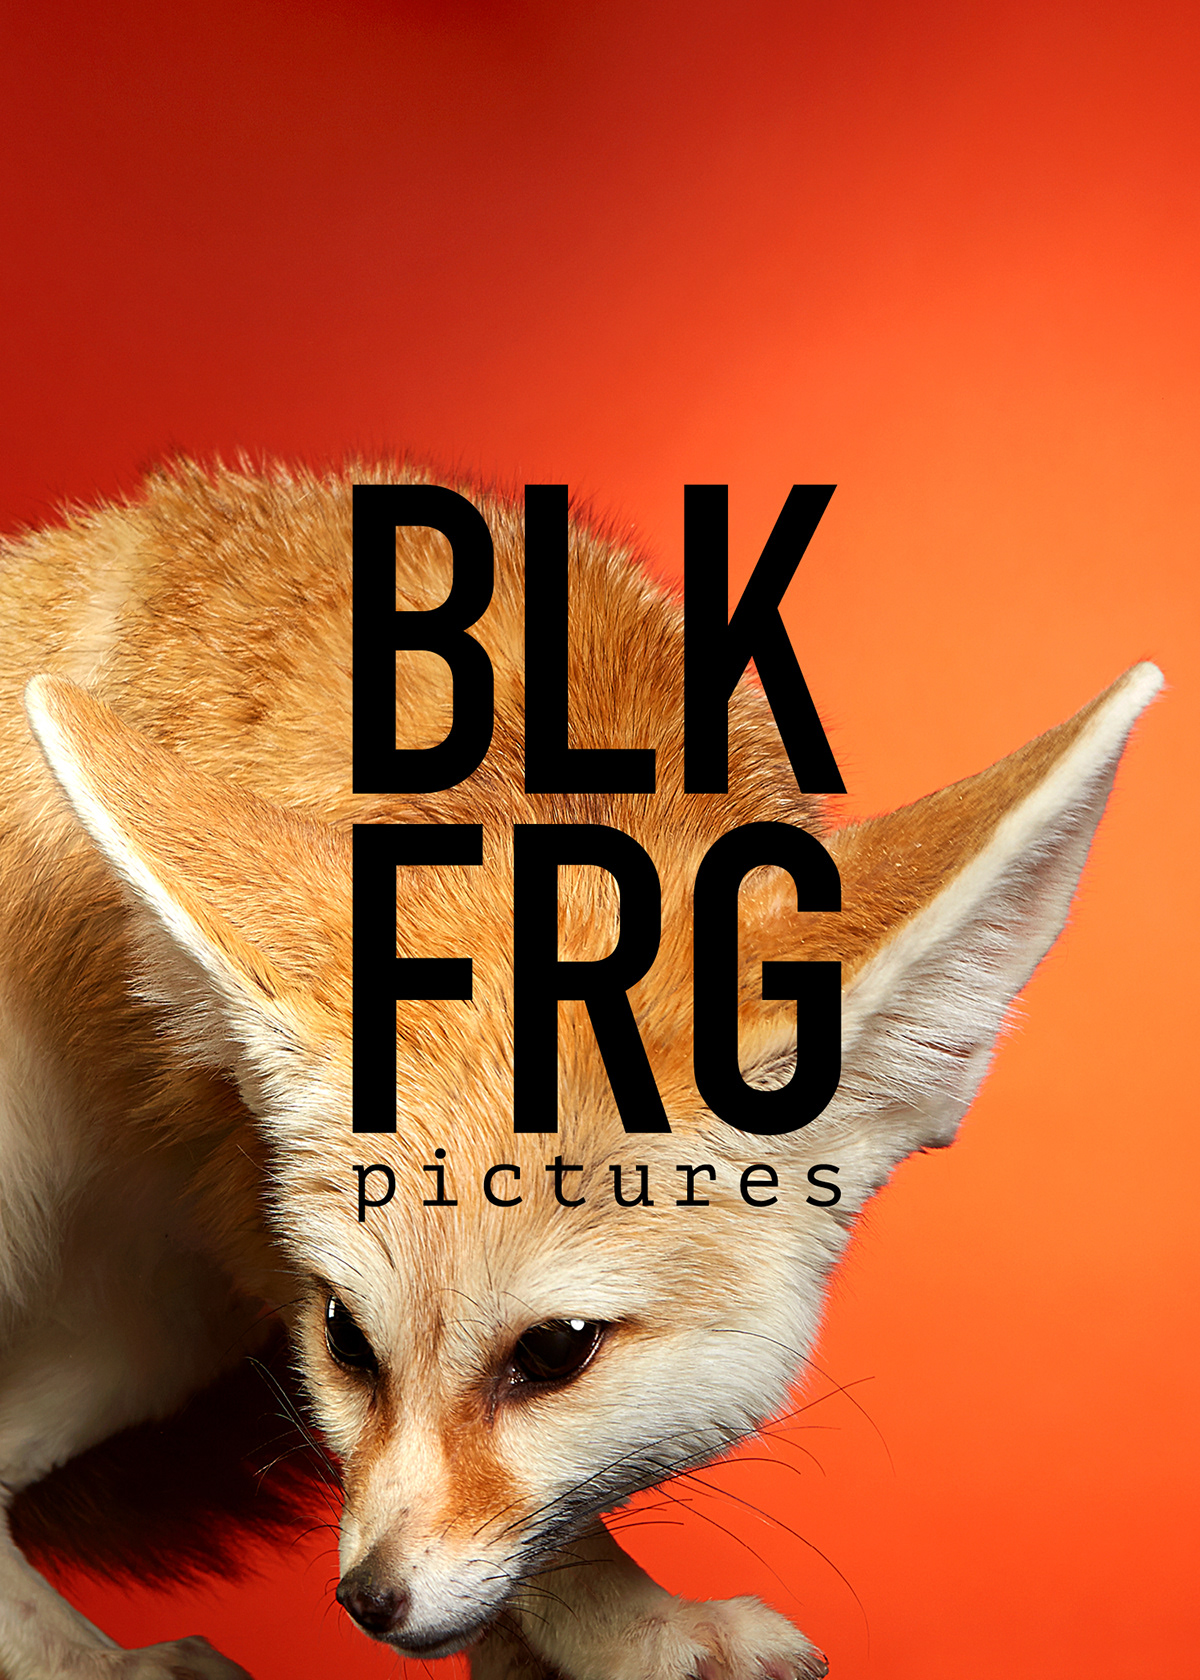 Photography  branding  pictures exotic Film   animals Beautiful images